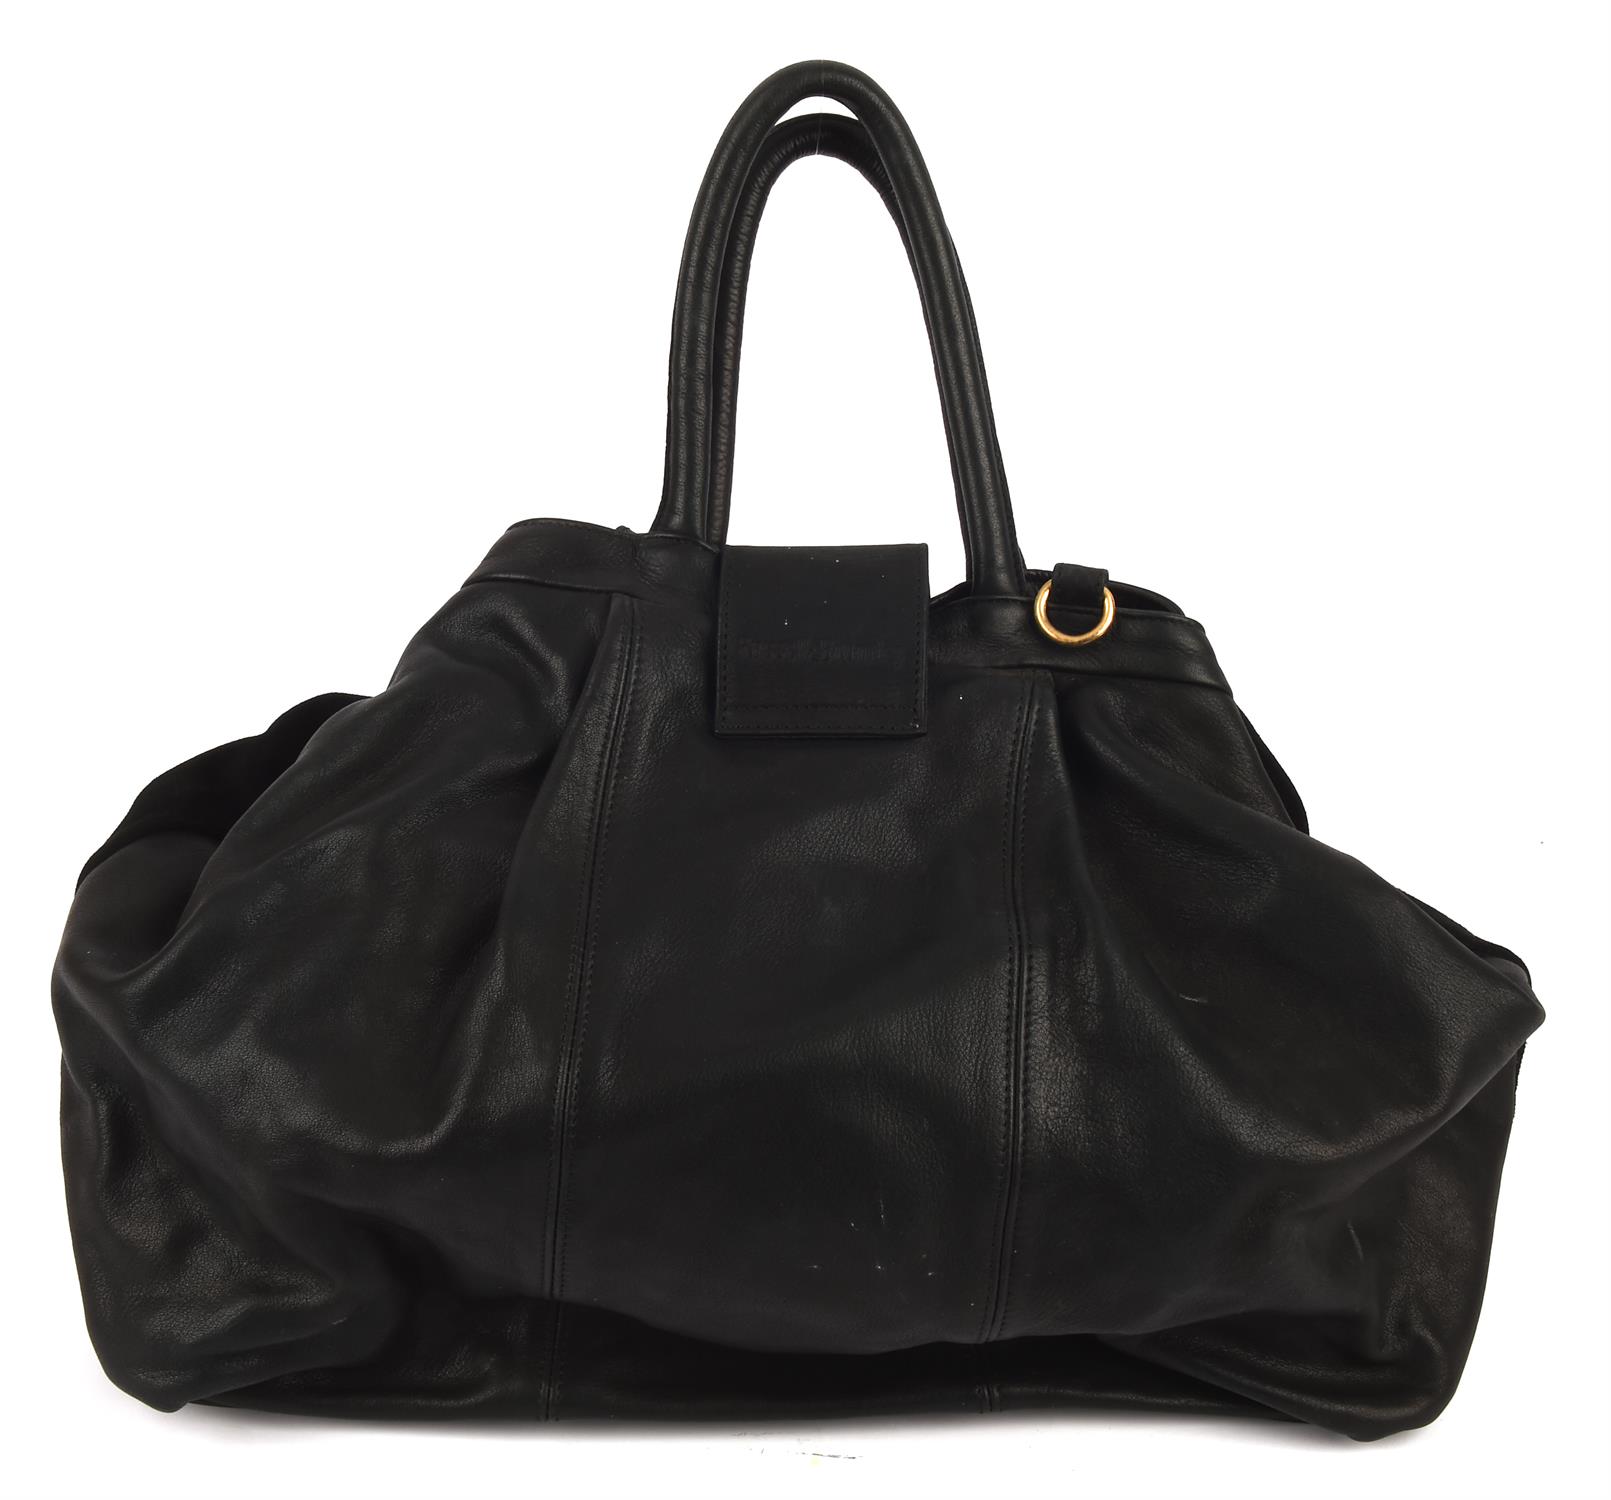 RUSSELL & BROMLEY 1990s a large vintage black leather and suede tote handbag with gold hardware and - Image 3 of 6